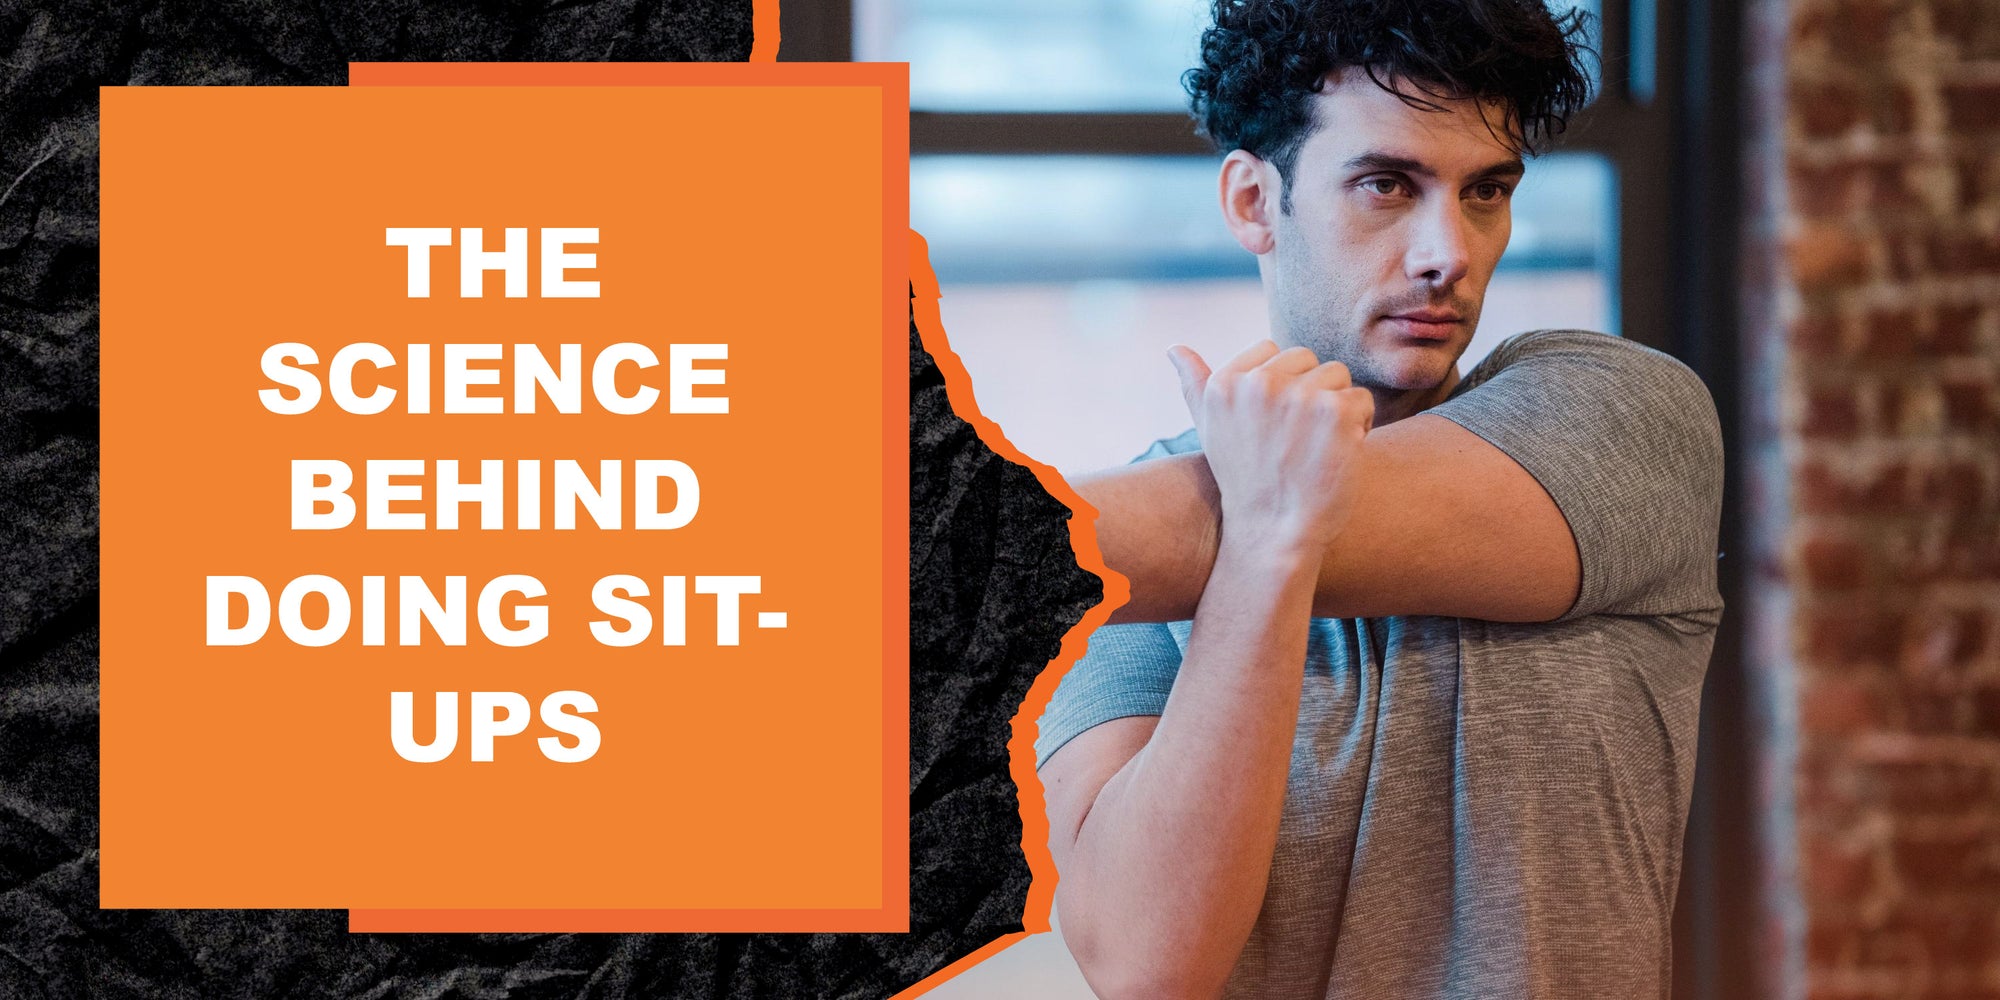 The Science Behind Doing Sit-Ups